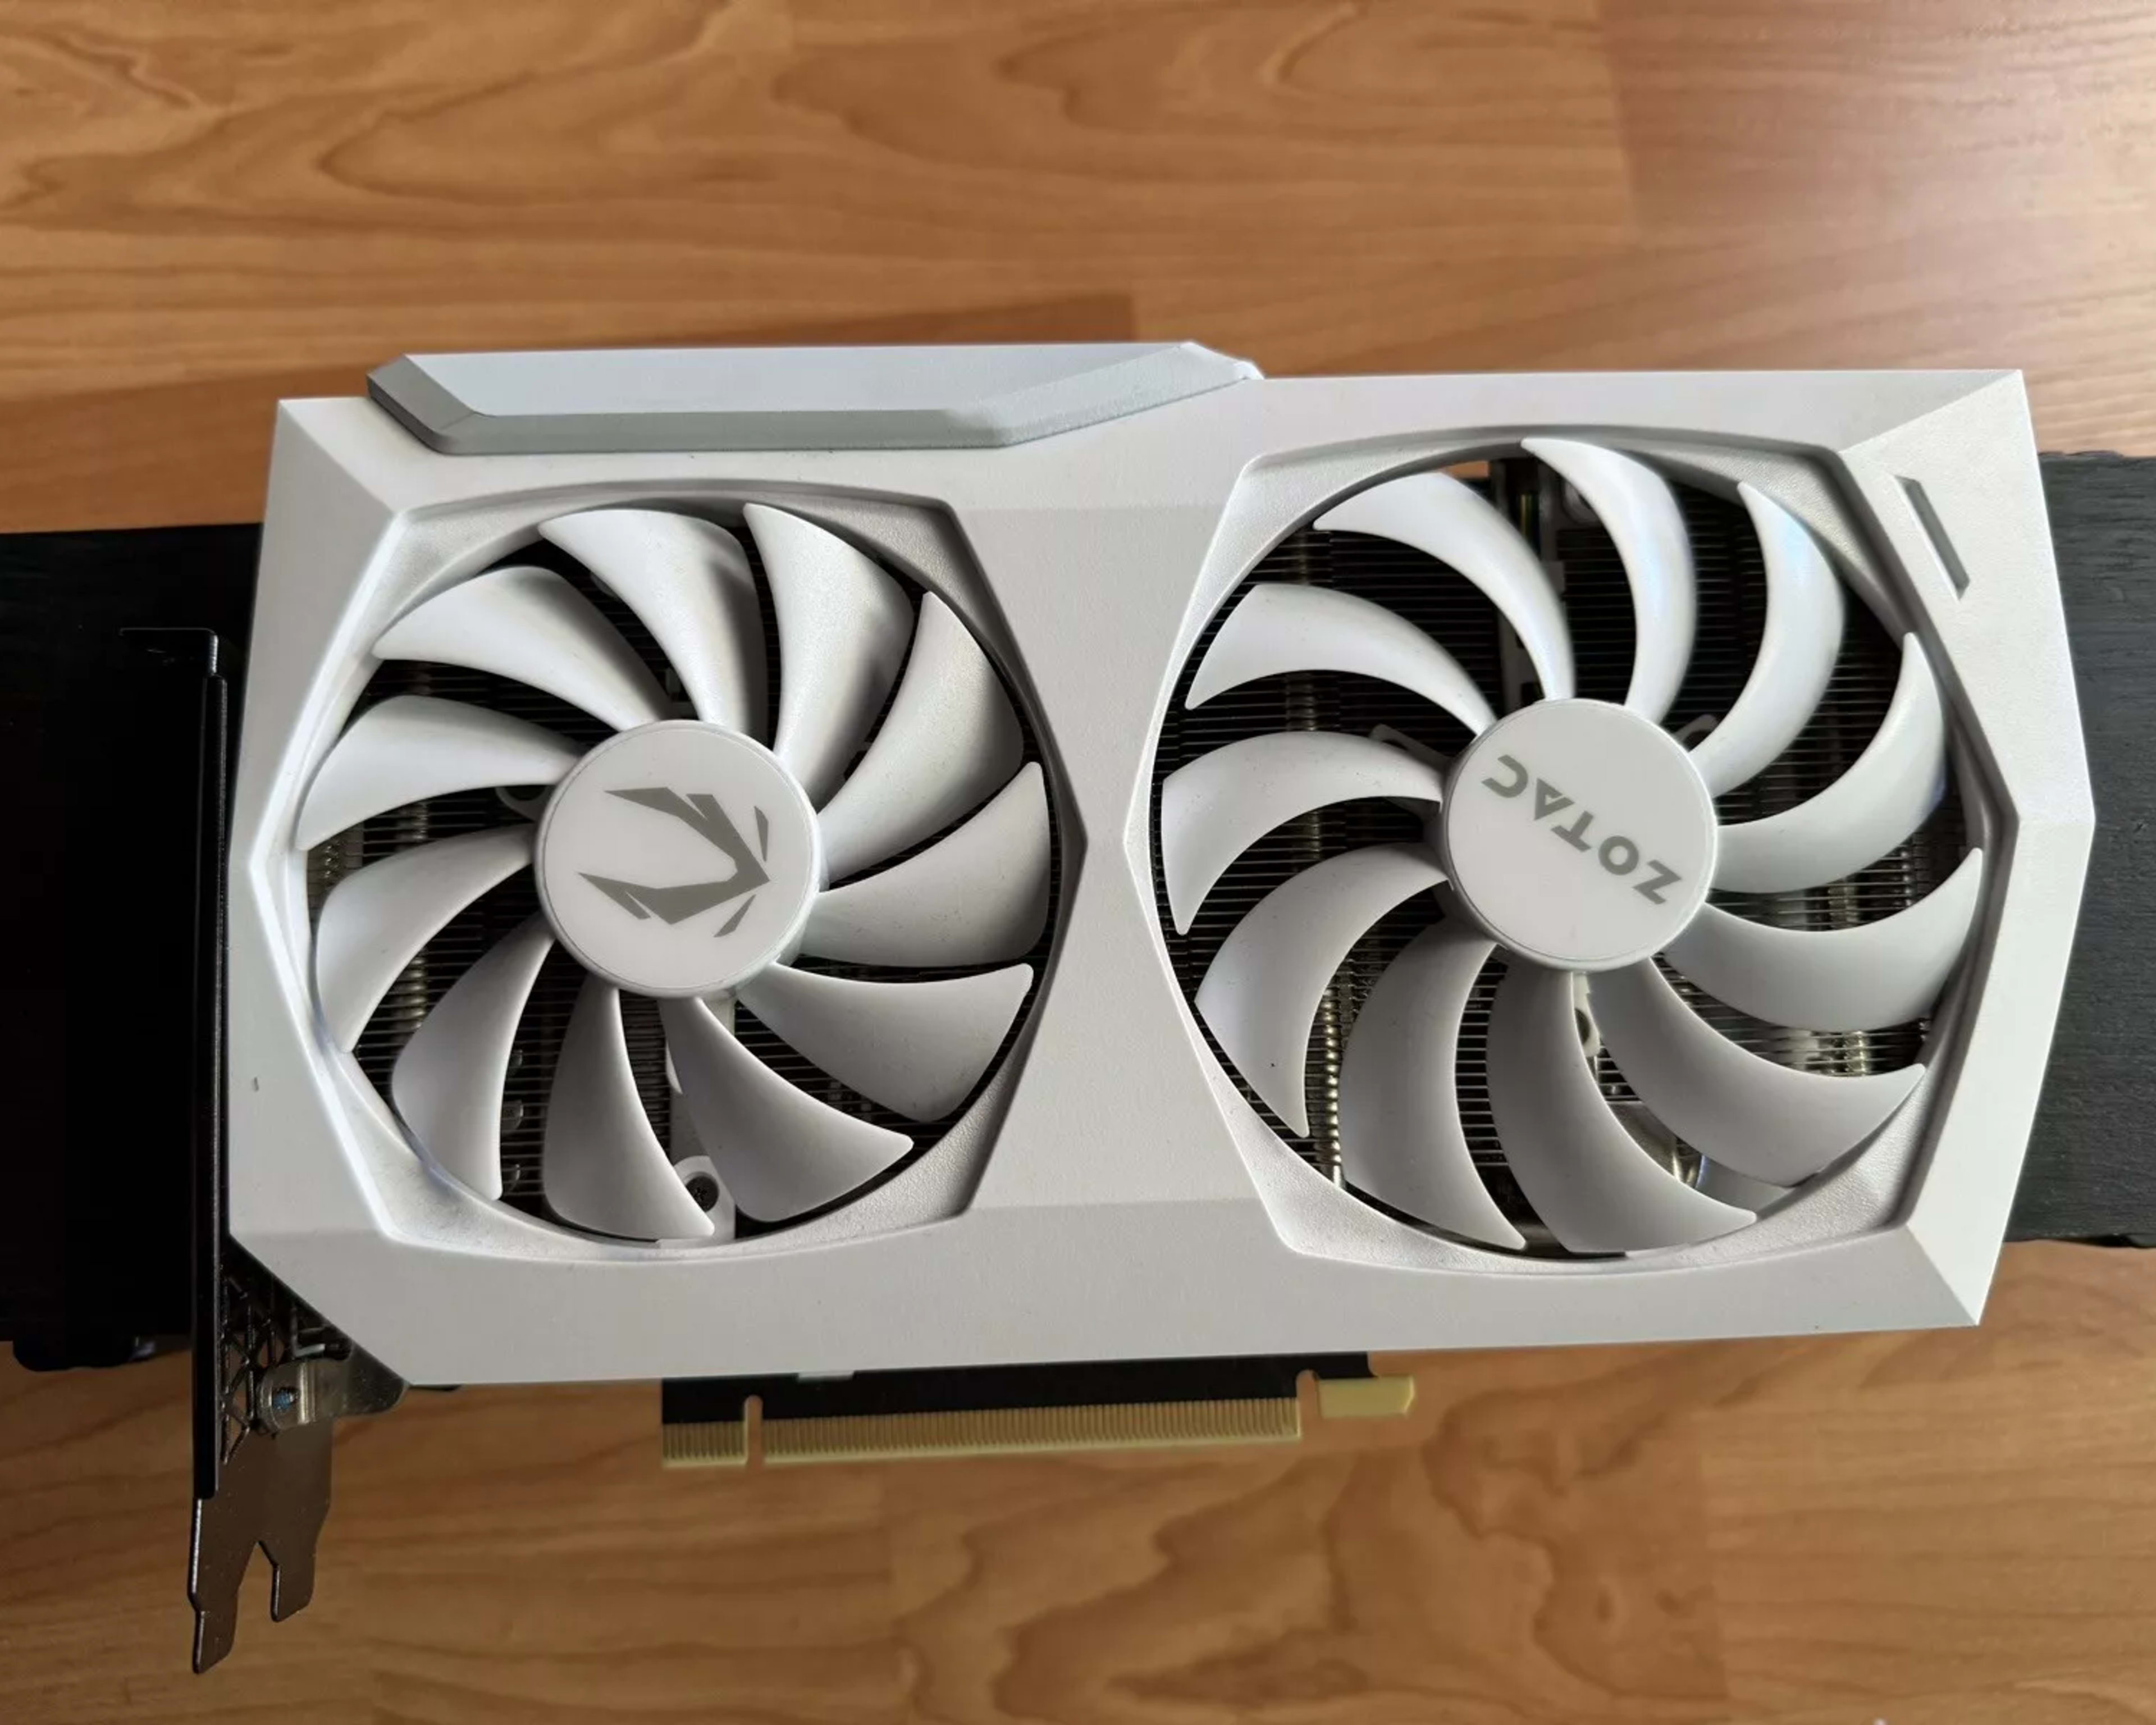 ZOTAC GAMING GeForce RTX 3060Ti AMP White Edition LHR 8GB GDDR6 Graphics Card (USED/GREAT)